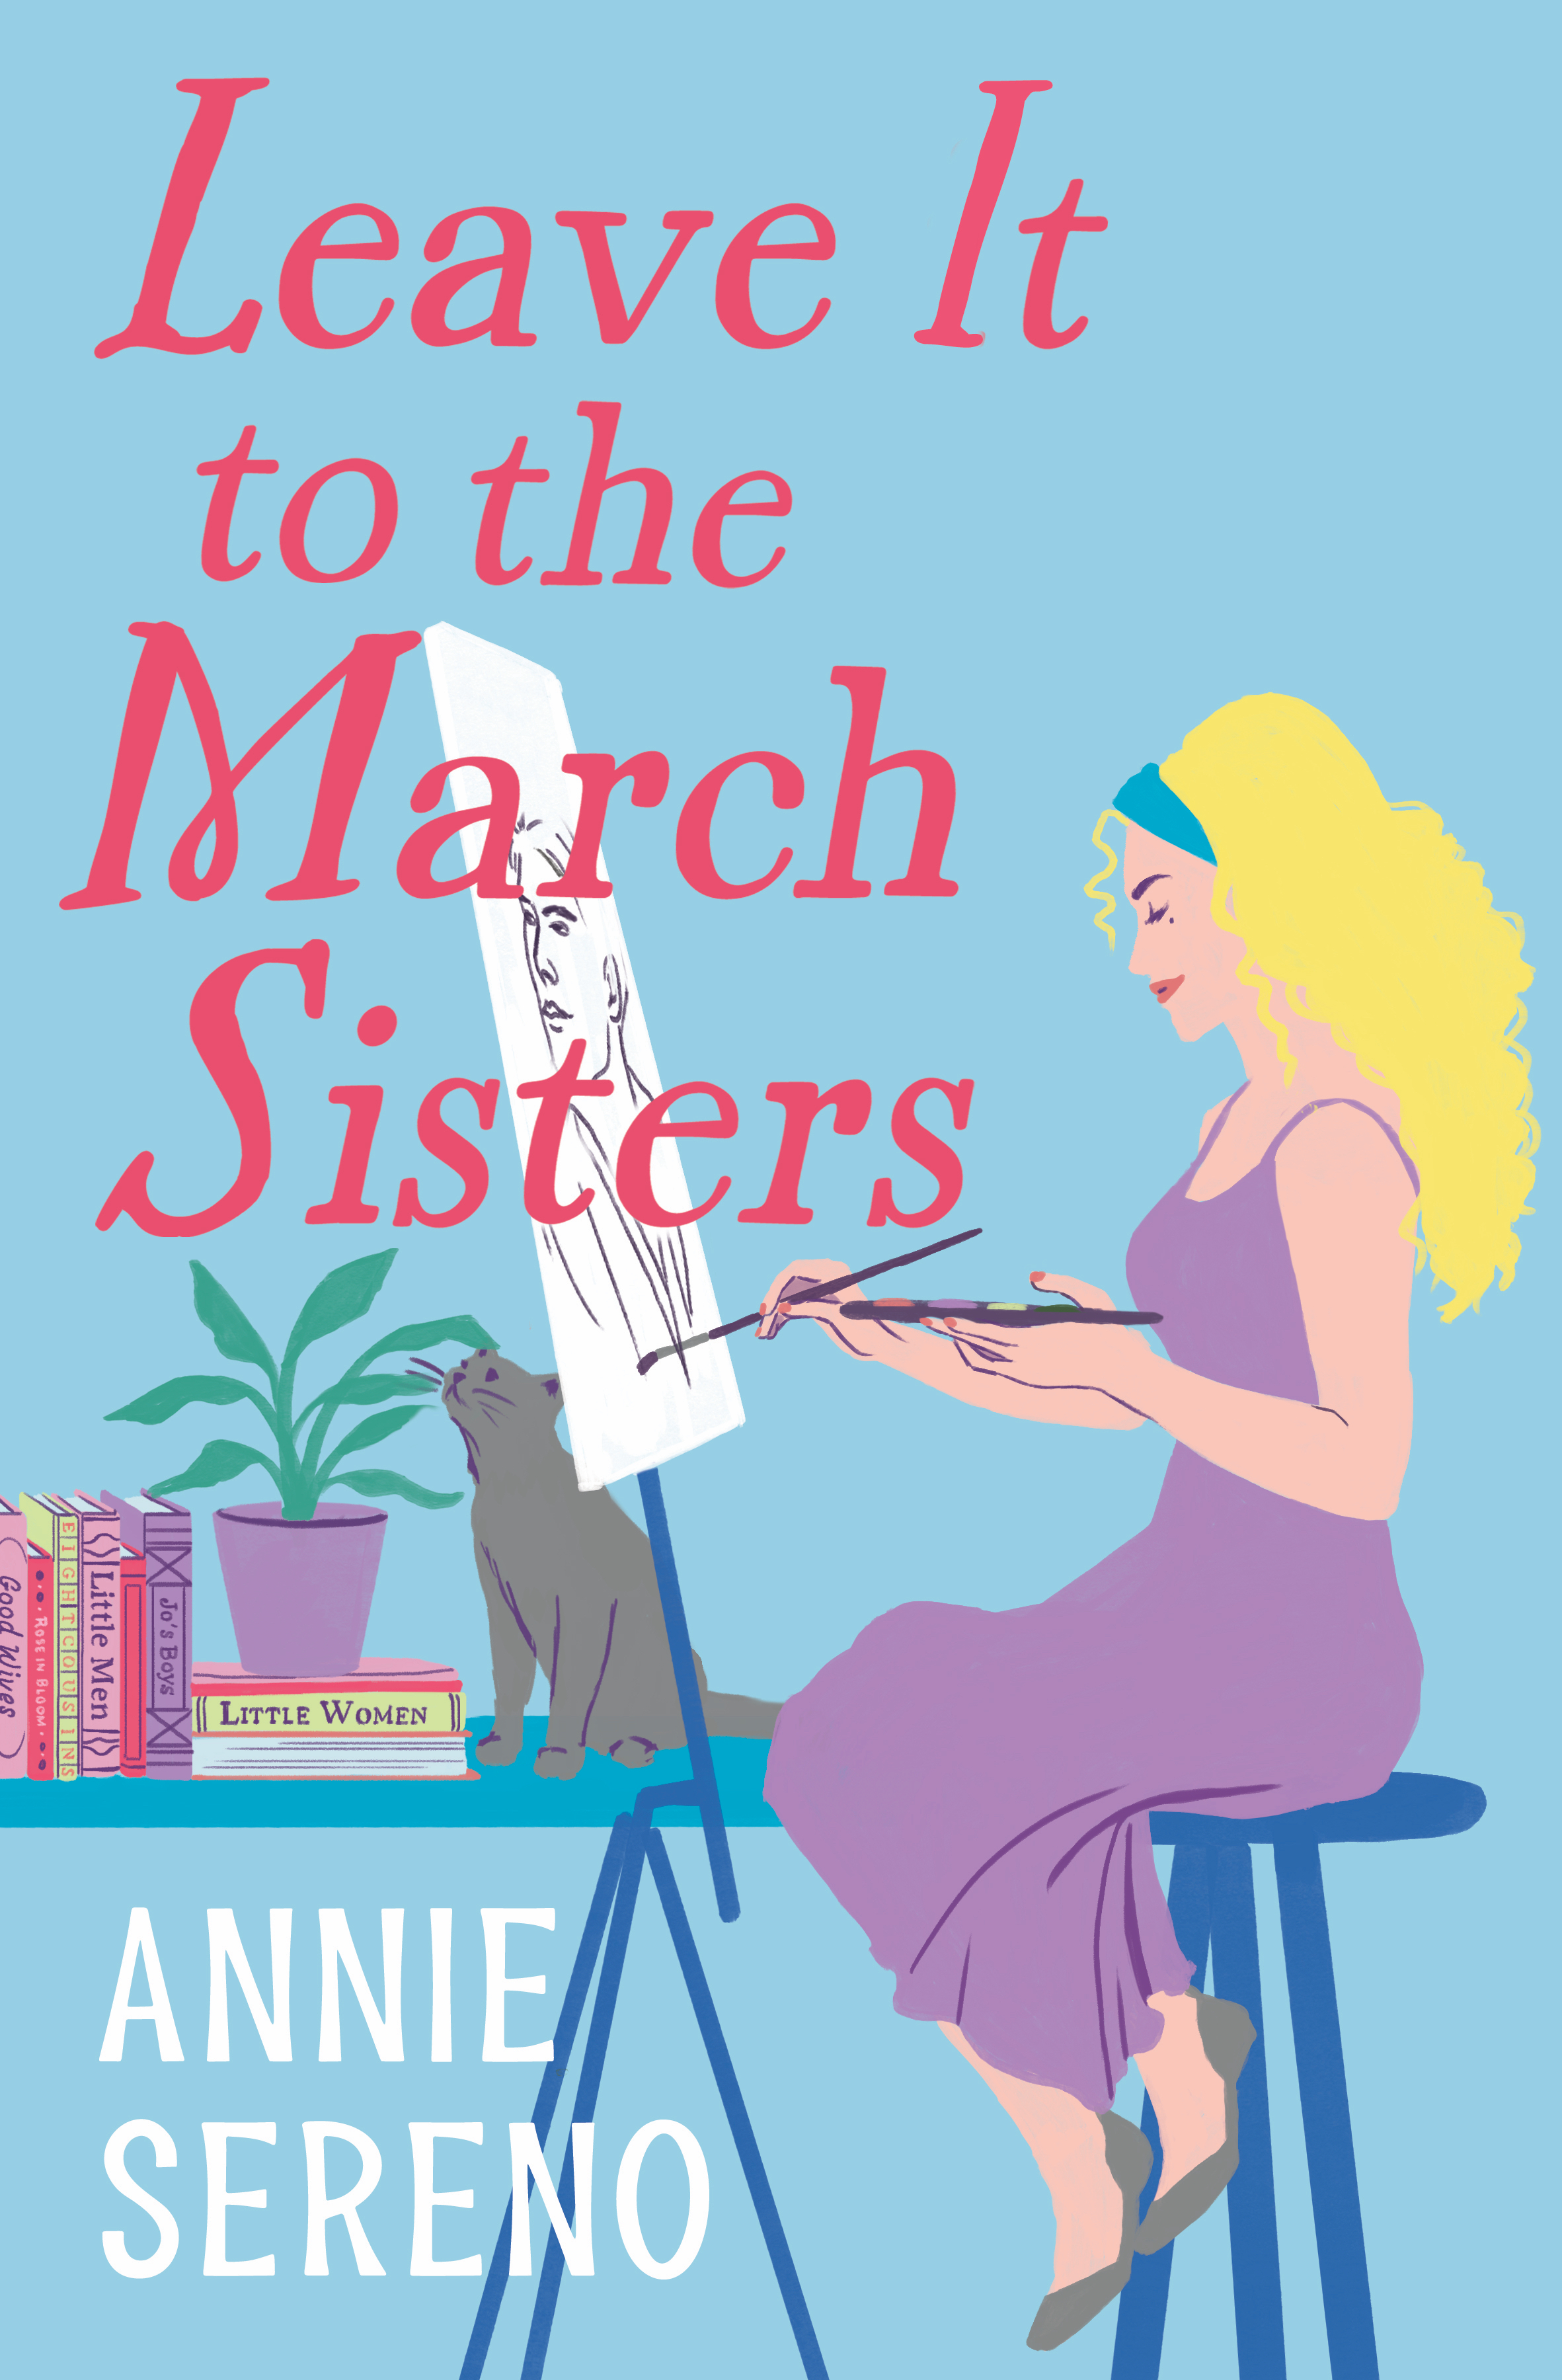 Sister Brother Selping Sex Video 1 St Time - Leave It to the March Sisters by Annie Sereno | Hachette Book Group